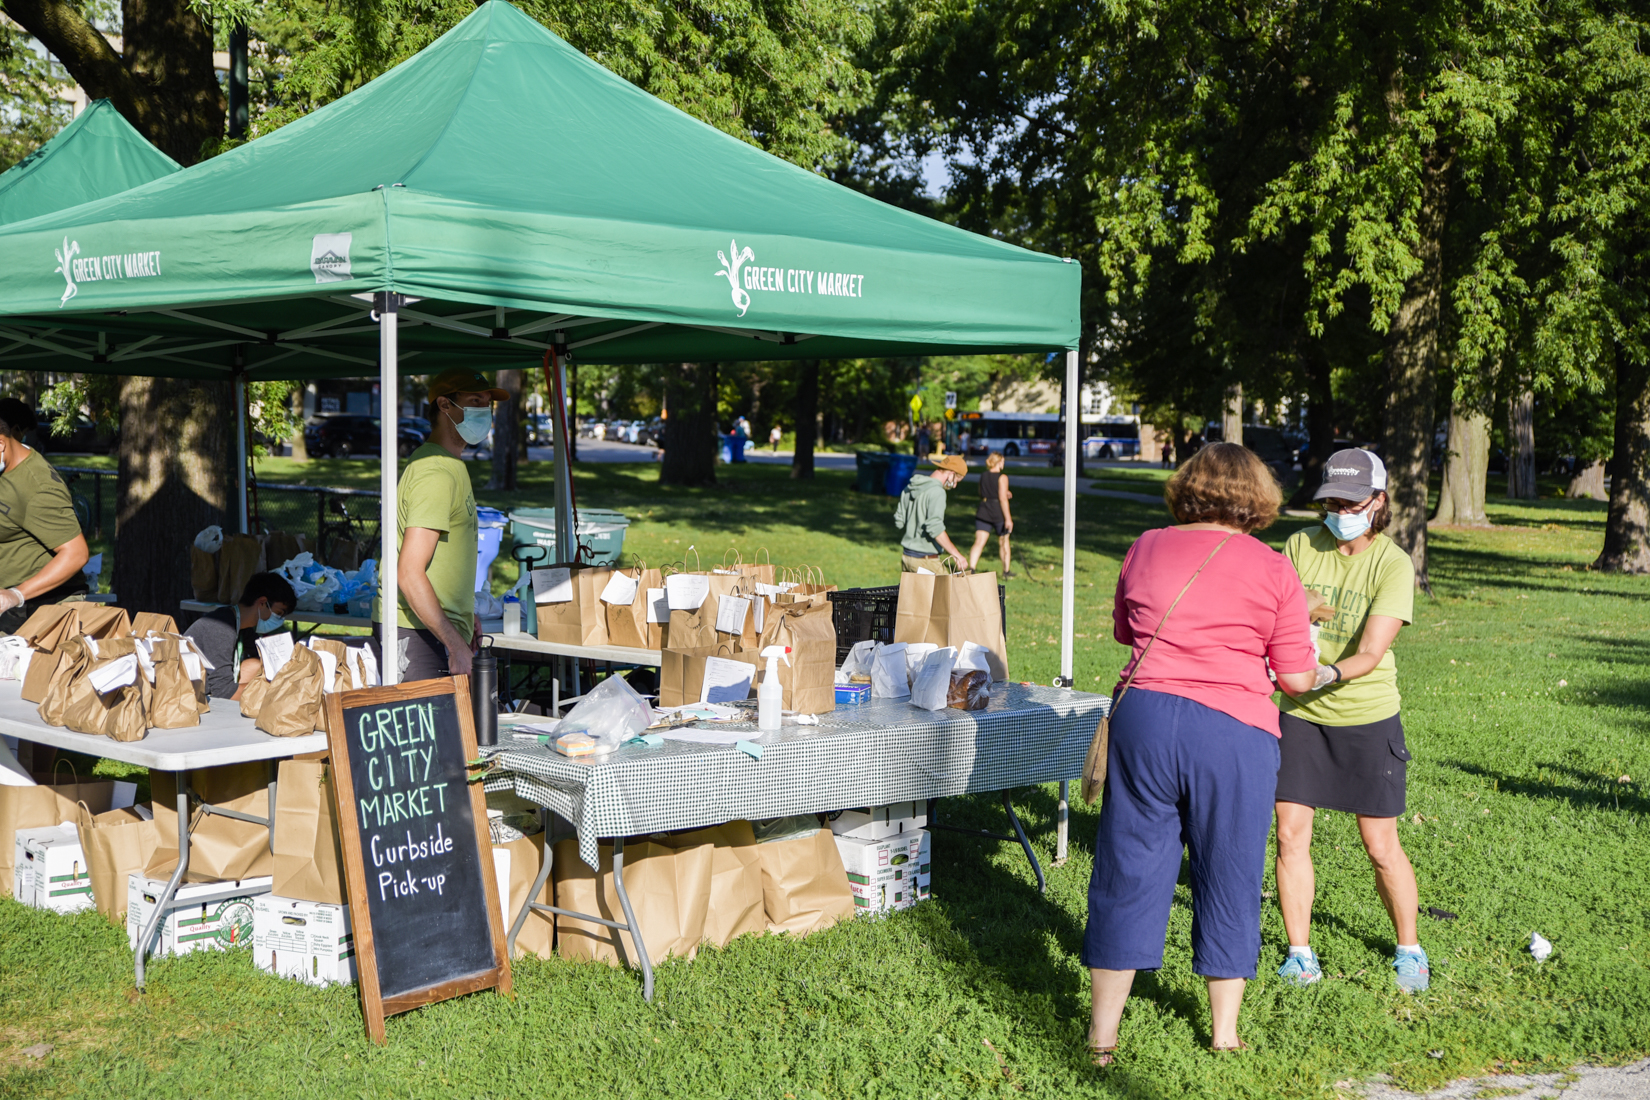 Green City Market Is Returning To Lincoln Park May 1. Here Are The